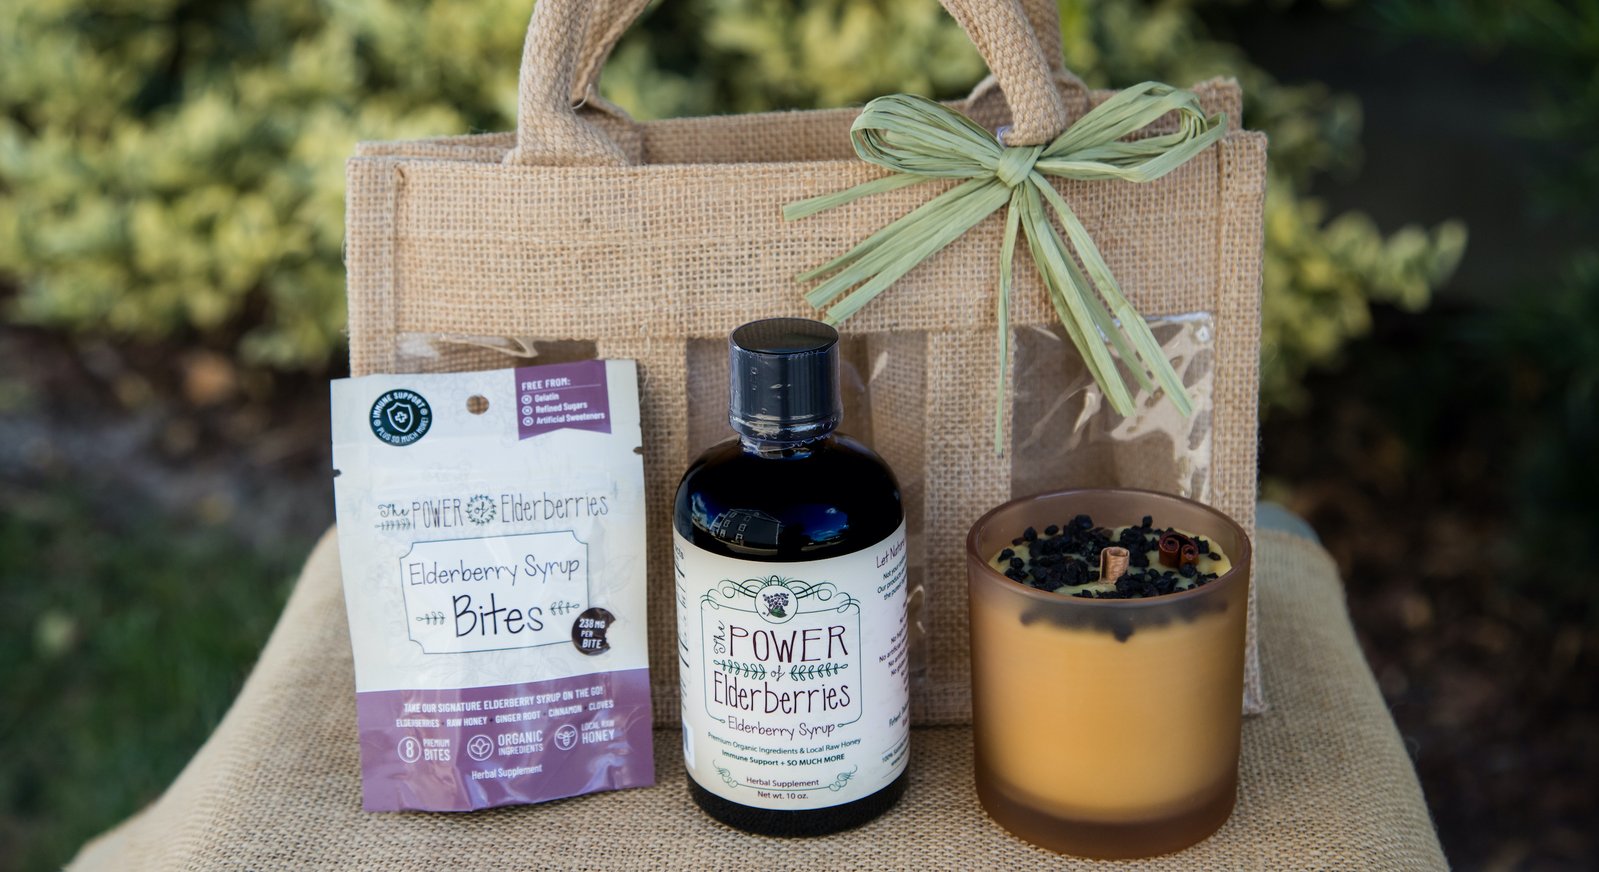 POWER of Elderberry products with brown gift bag